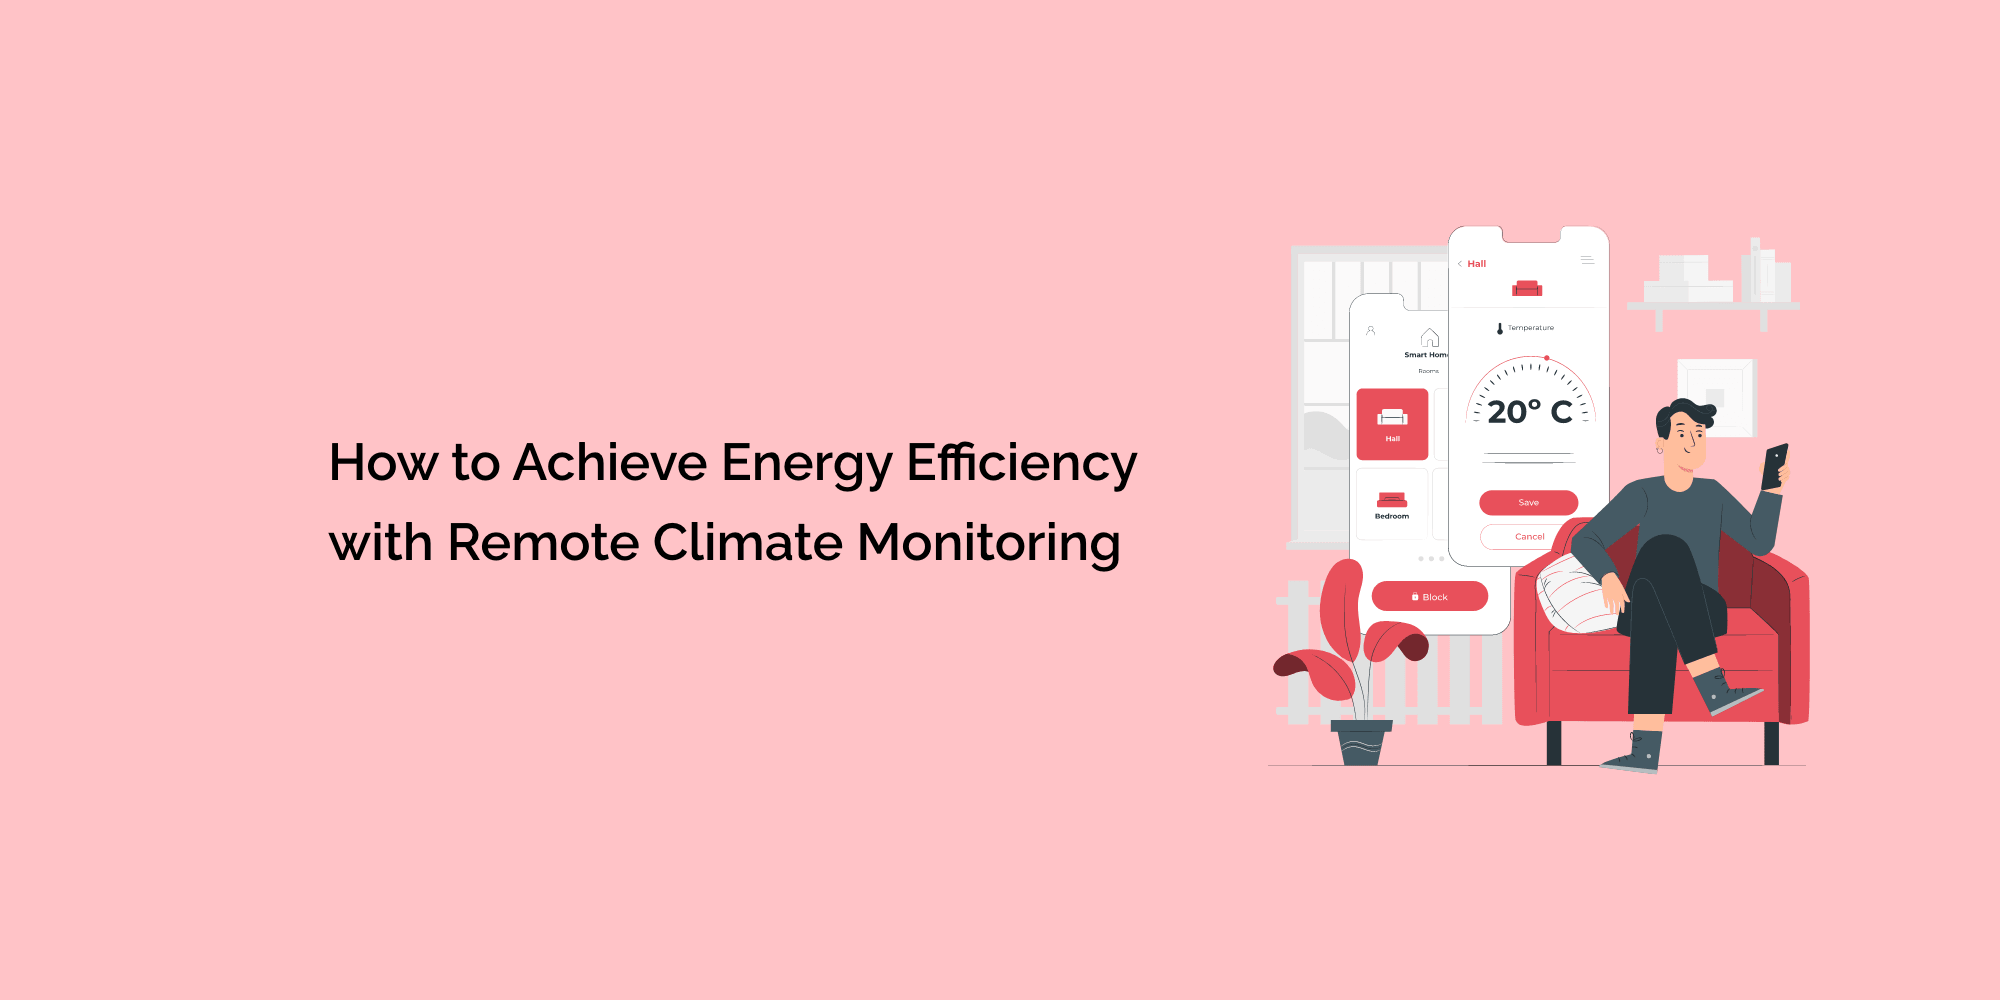 How to Achieve Energy Efficiency with Remote Climate Monitoring